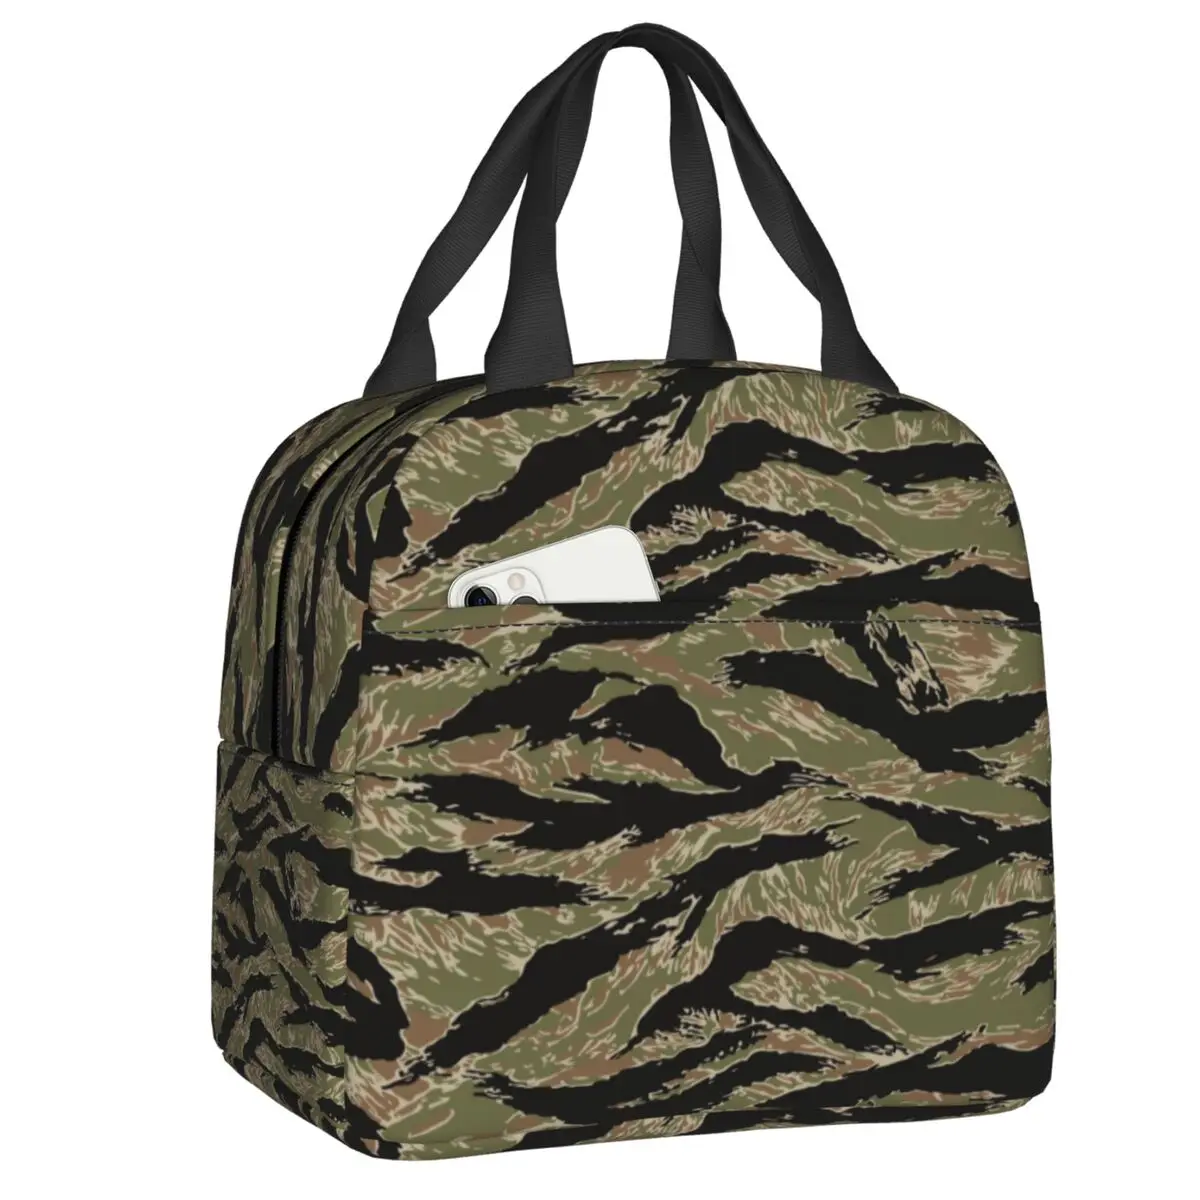 Tiger Stripe Camo Insulated Lunch Bags for Women Military Tactical Camouflage Thermal Cooler Food Lunch Box Kids School Children